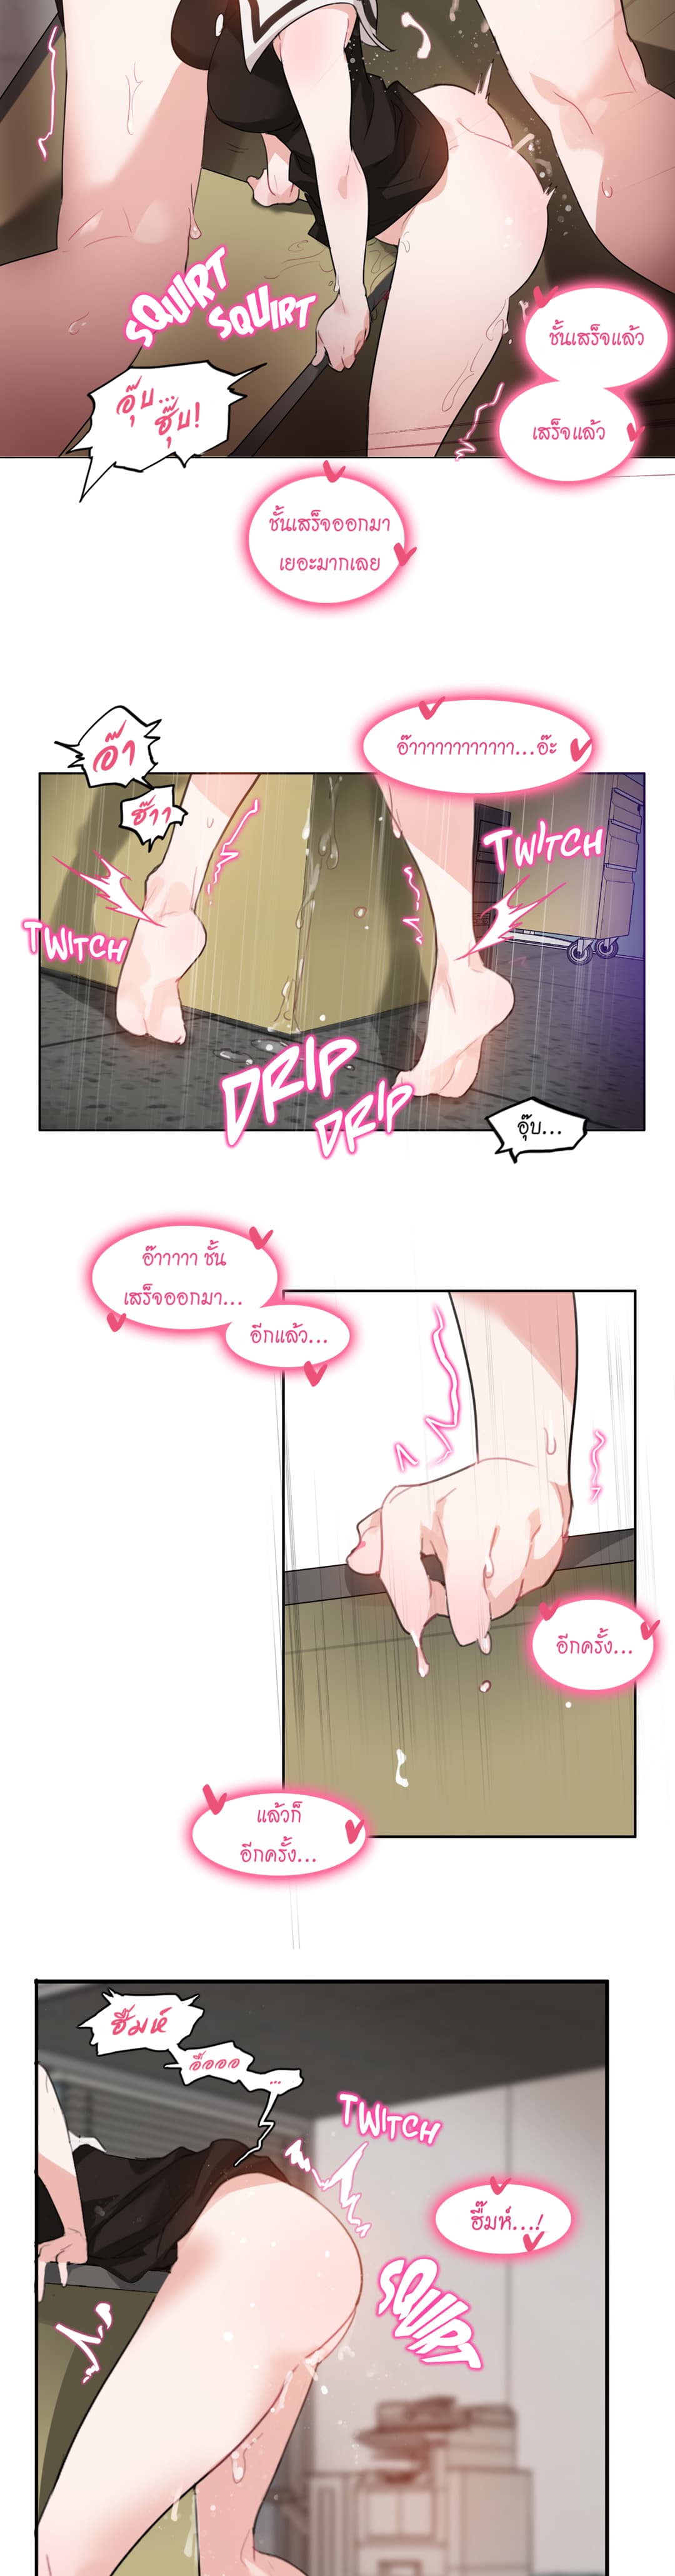 A Pervert’s Daily Life 14 (8)